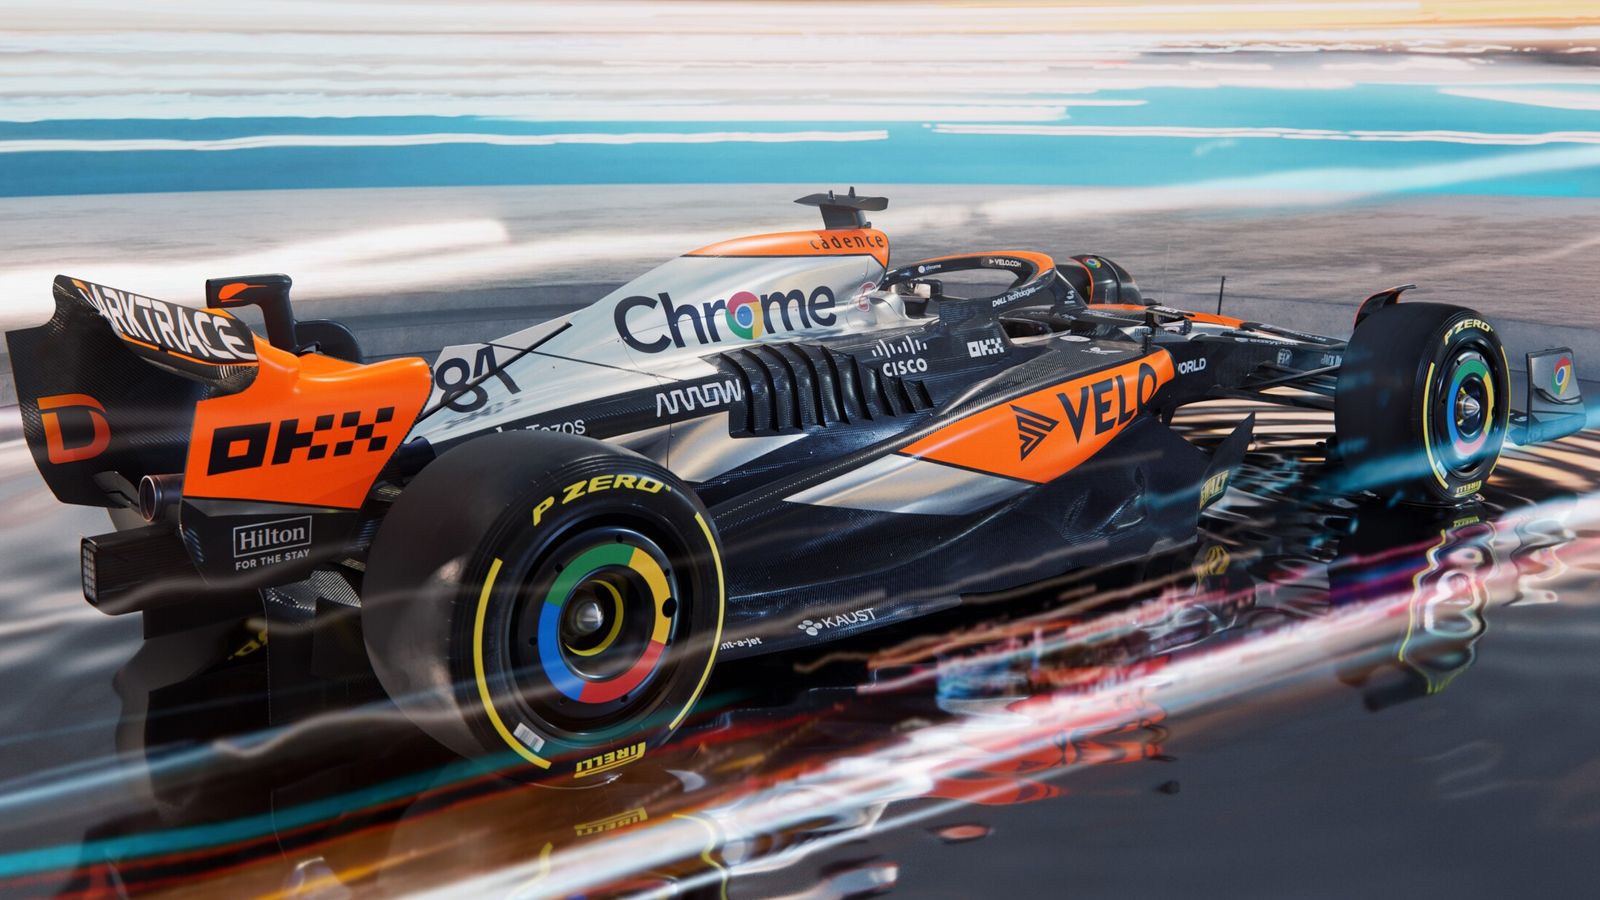 McLaren to run special chrome livery at British GP as part of 60th